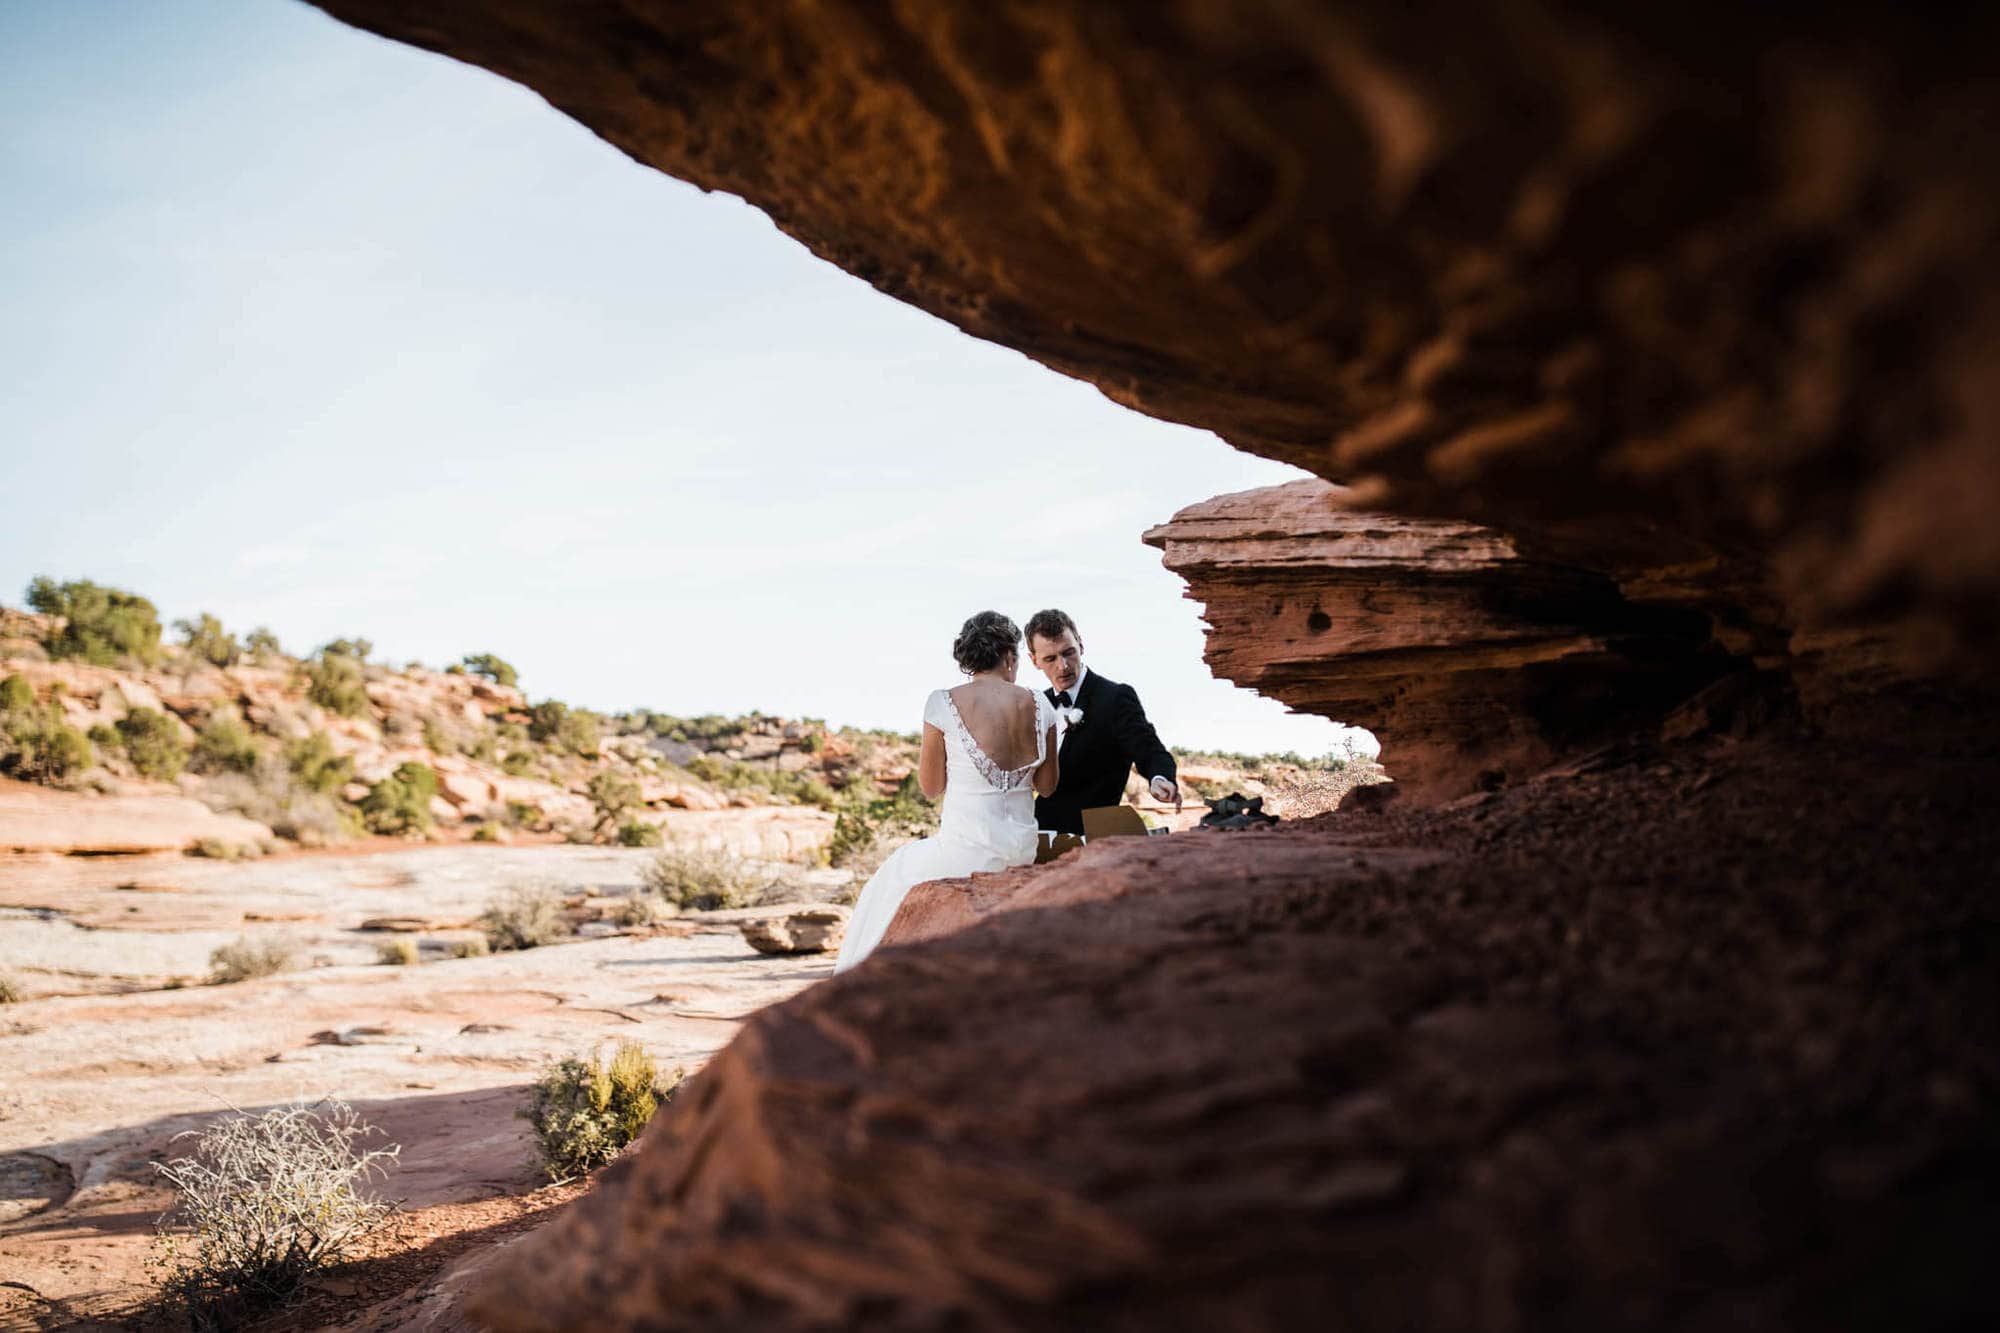 This classy Arches National Park Wedding is an elopement for the ages. Full of dancing, cake, and sweet romantic dancing, you have to check this one out.